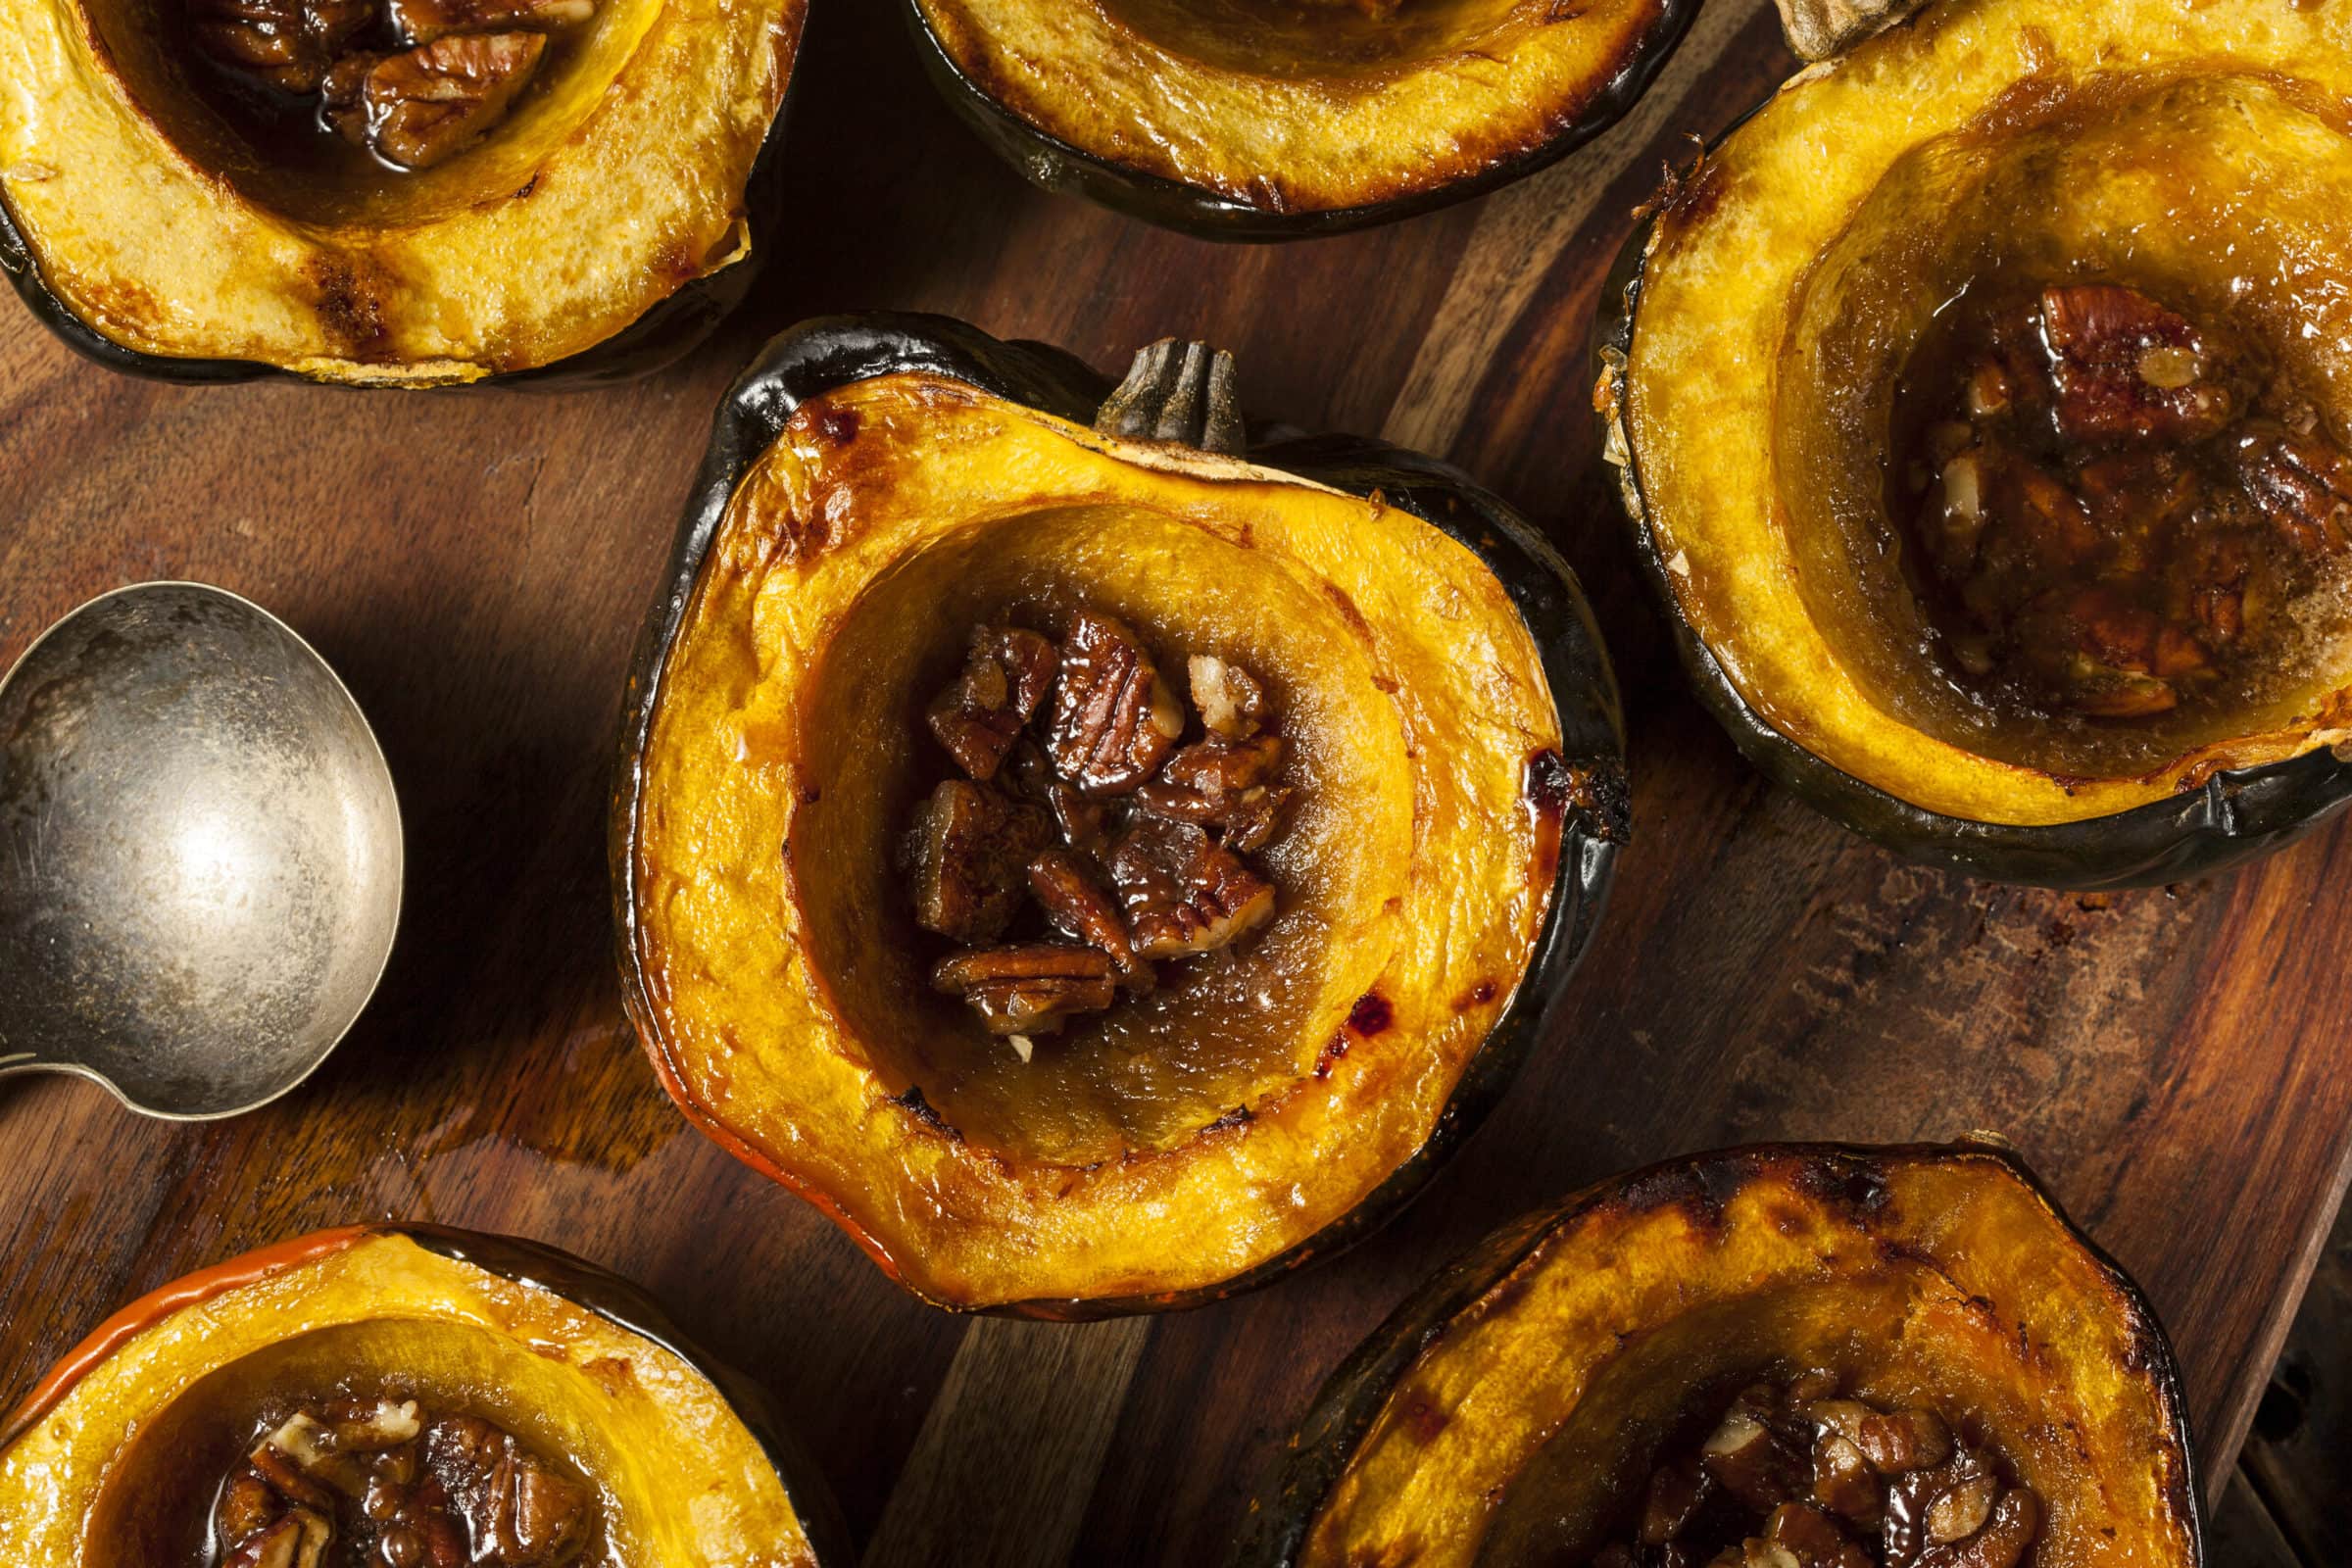 What to Serve with Acorn Squash